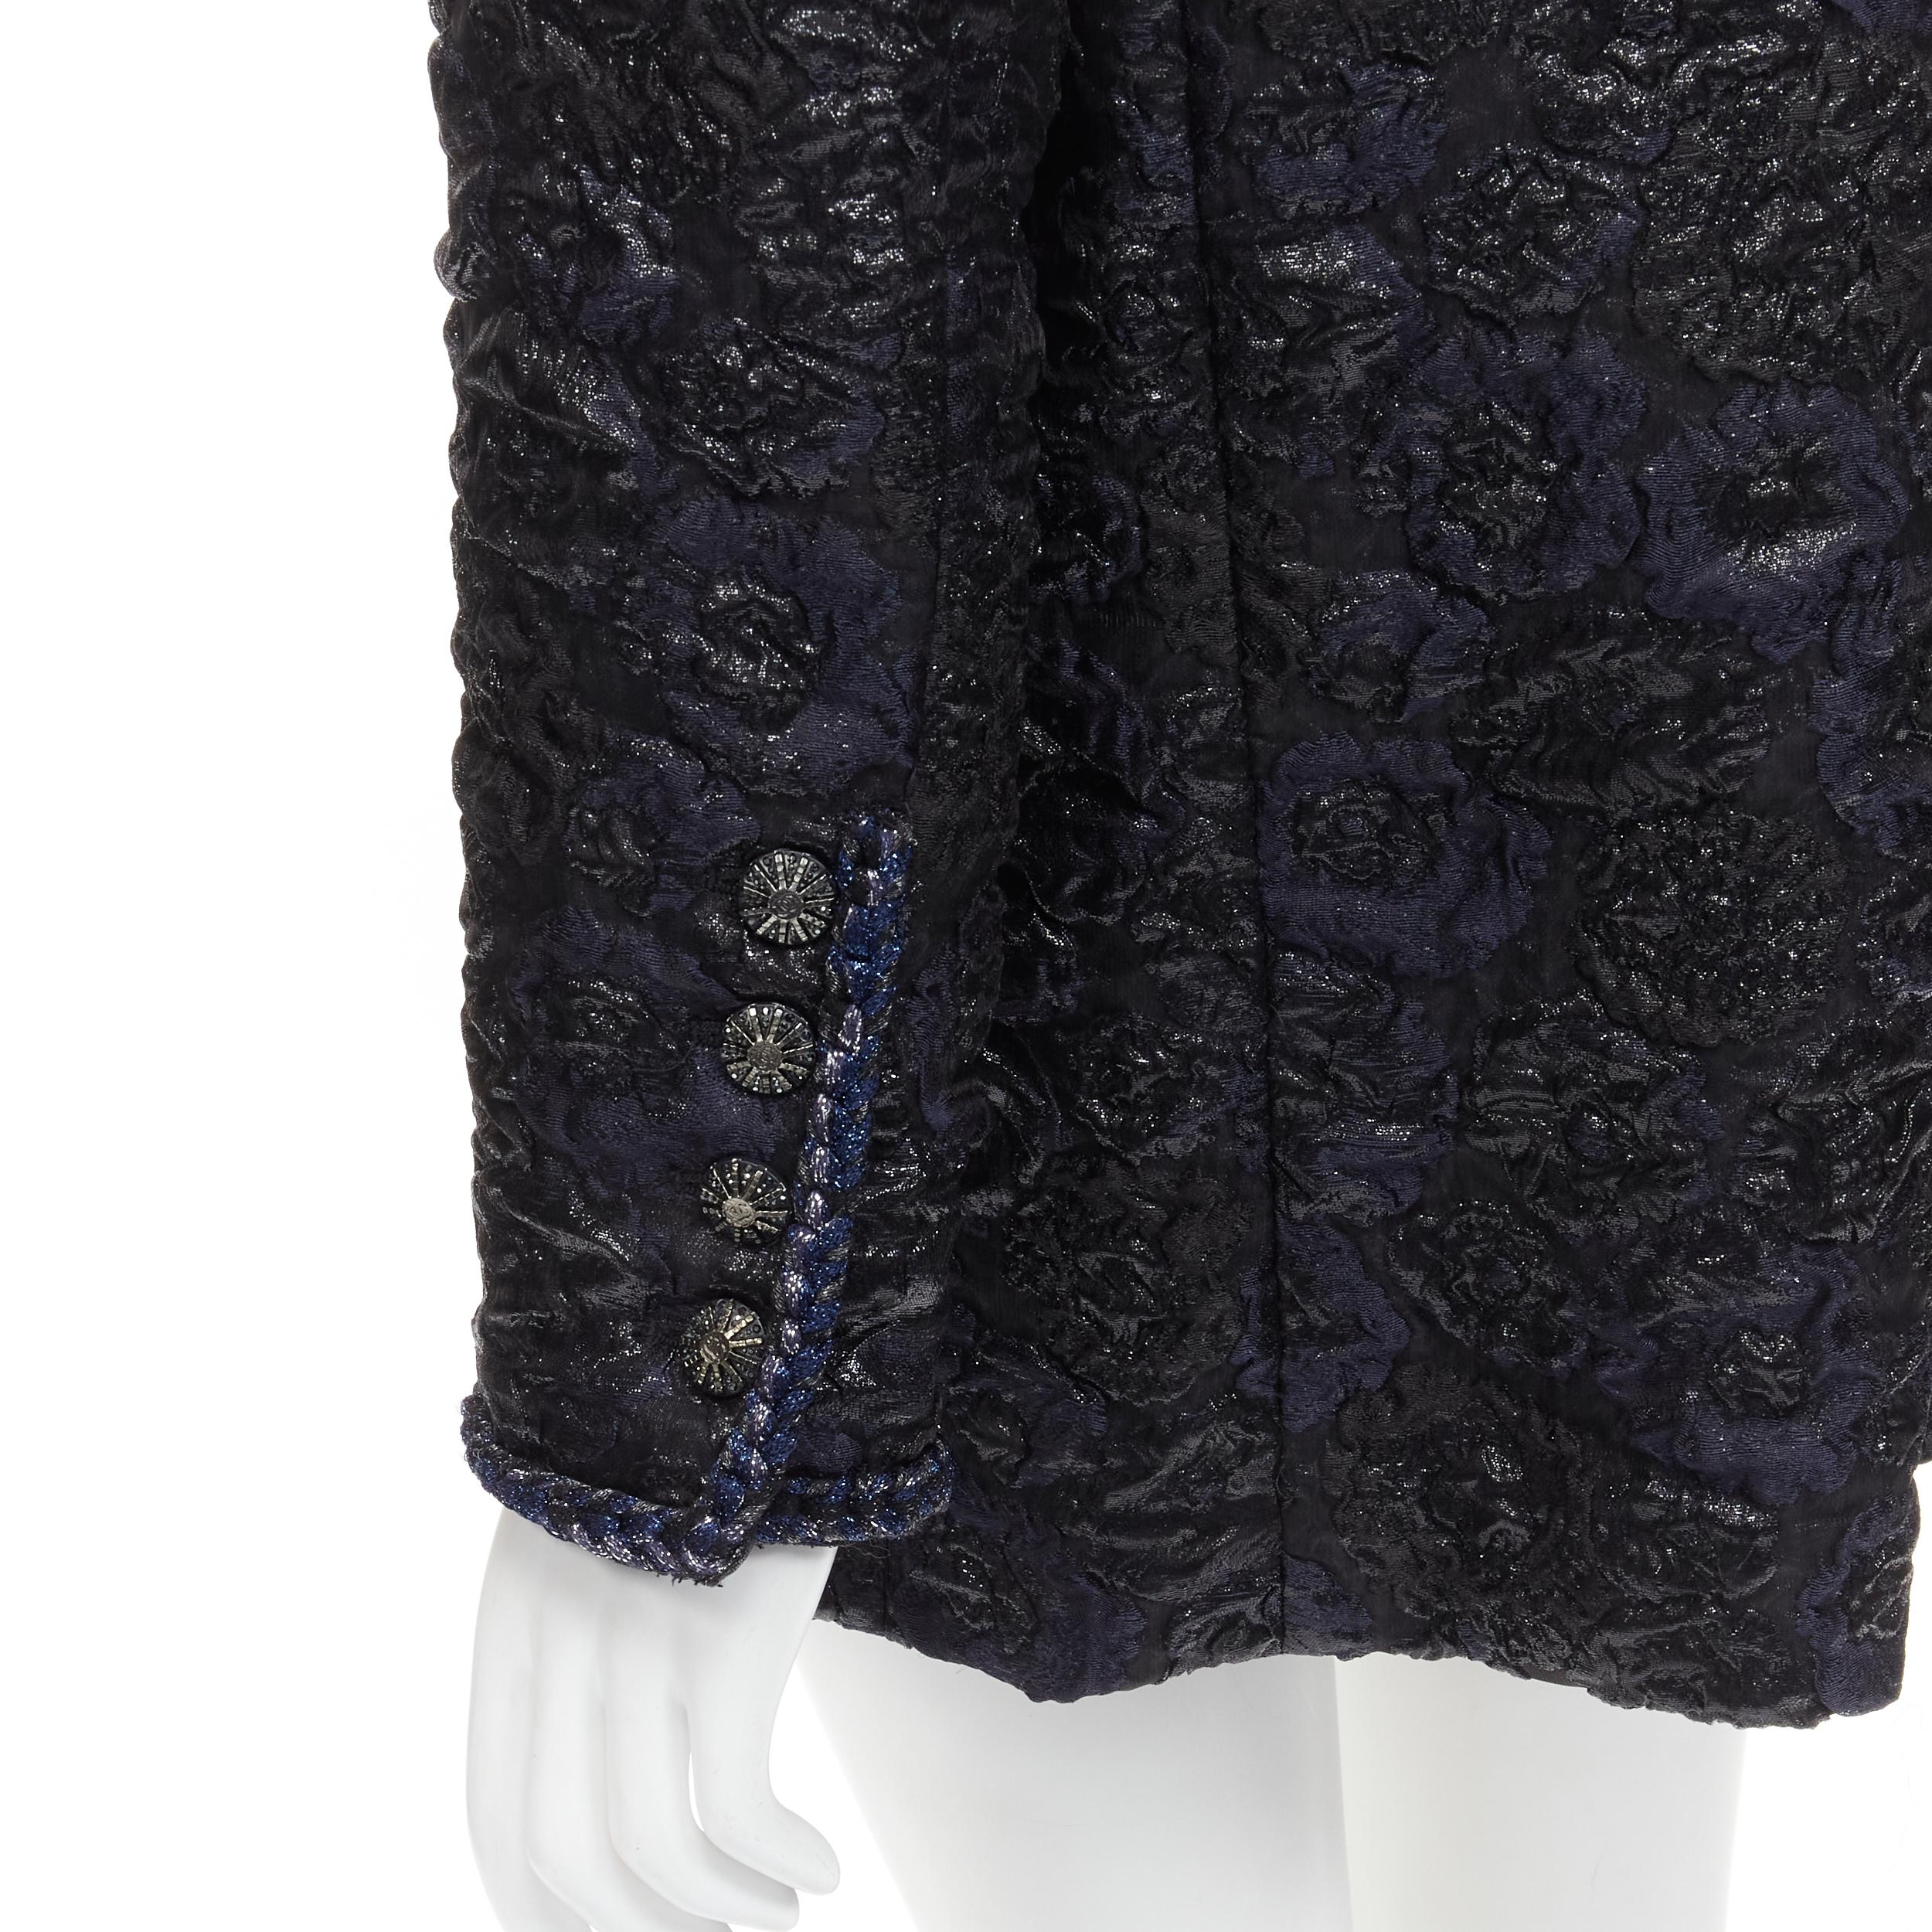 CHANEL 16B Act 1 black floral Camellia cloque crystal button jacket FR46 3XL
Brand: Chanel
Designer: Karl Lagerfeld
Collection: 16B Act 1 
Material: Acetate
Color: Black
Pattern: Solid
Closure: Zip
Extra Detail: Black metallic lurex floral cloque